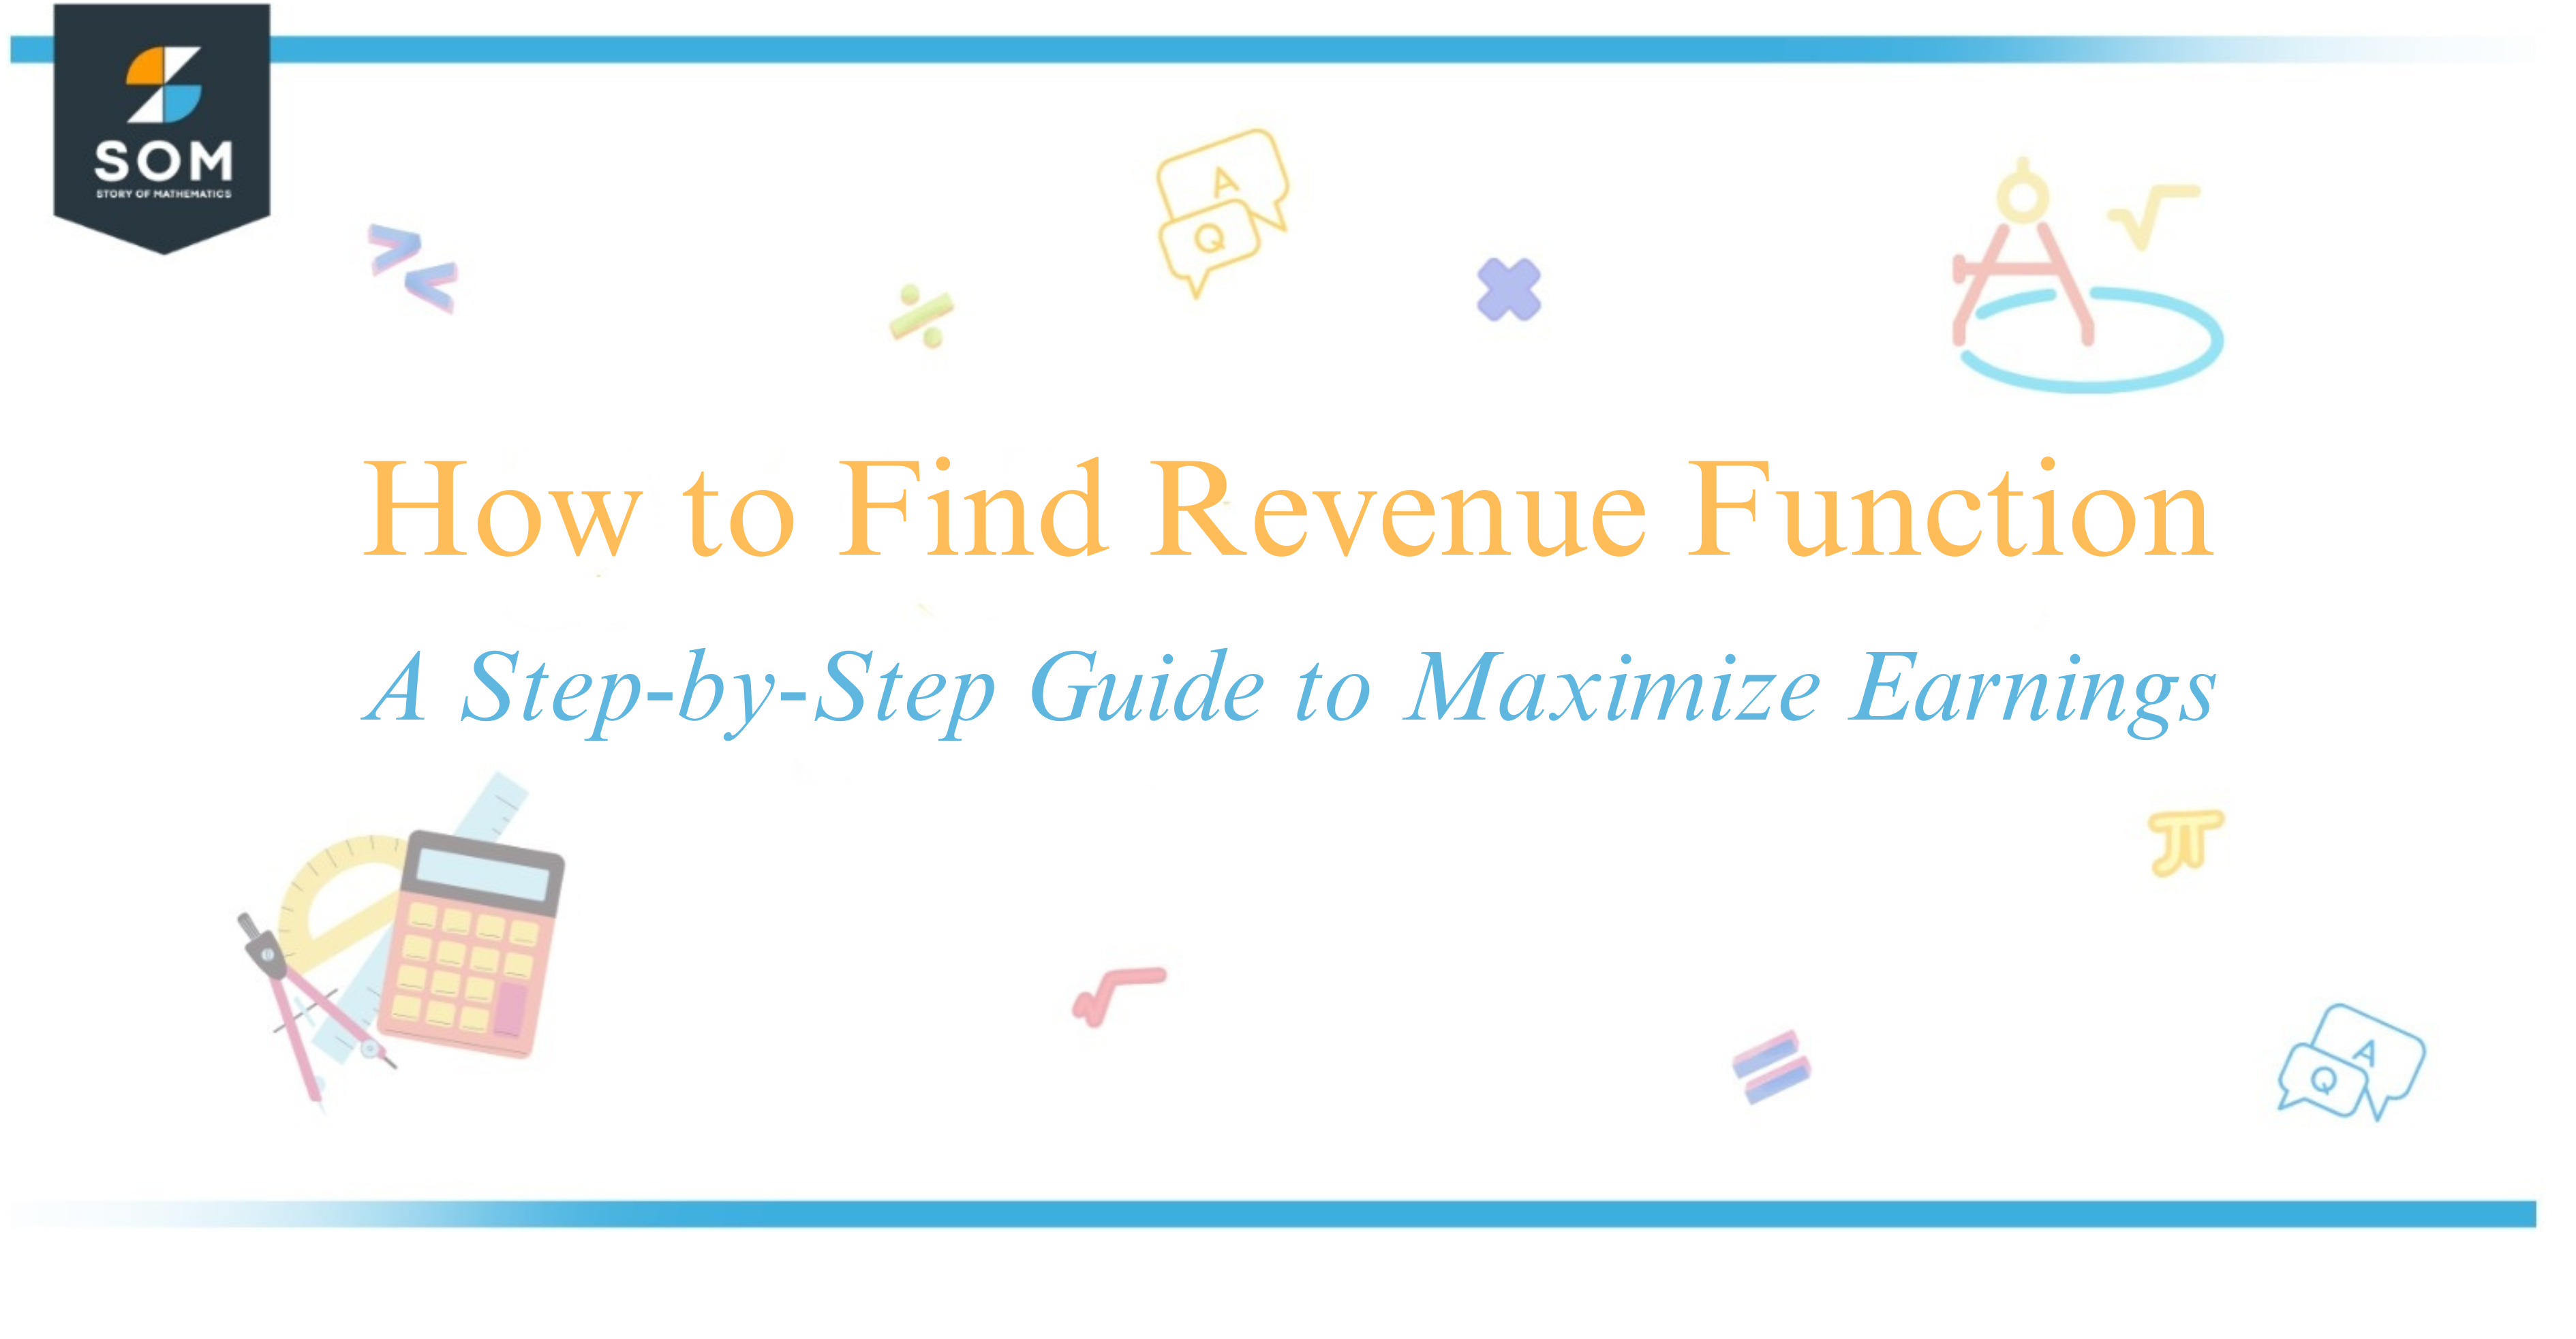 How to Find Revenue Function A Step-by-Step Guide to Maximize Earnings